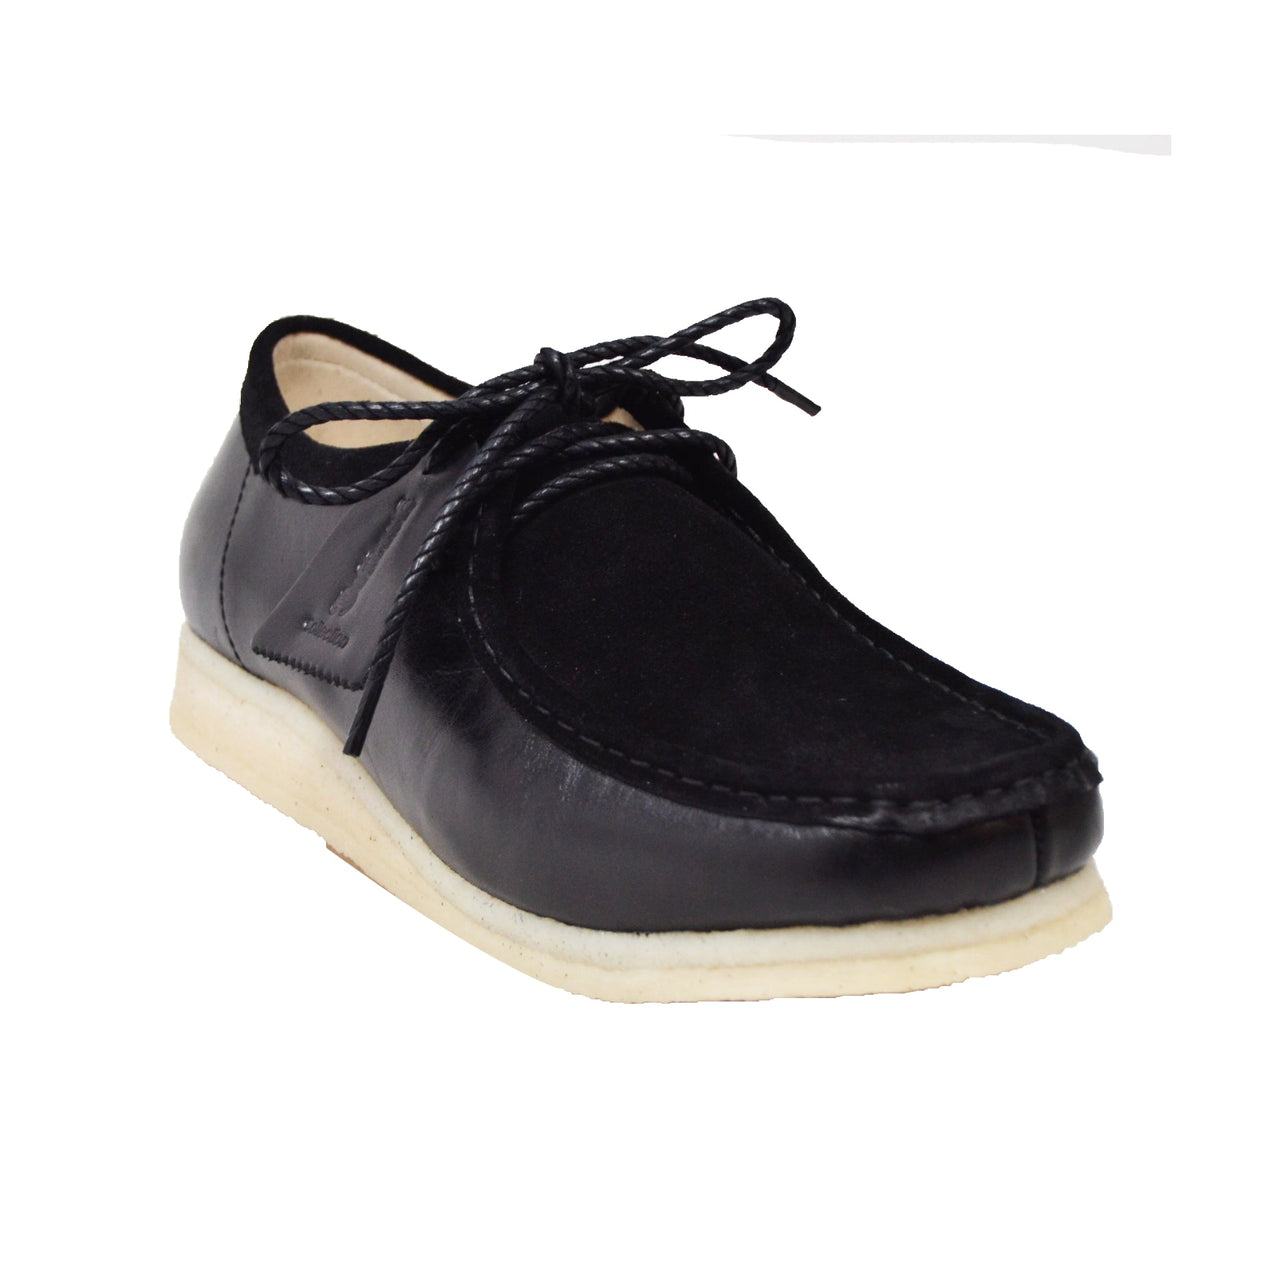 British Walkers Wallabee Low Top Men's Suede and Leather Crepe Sole